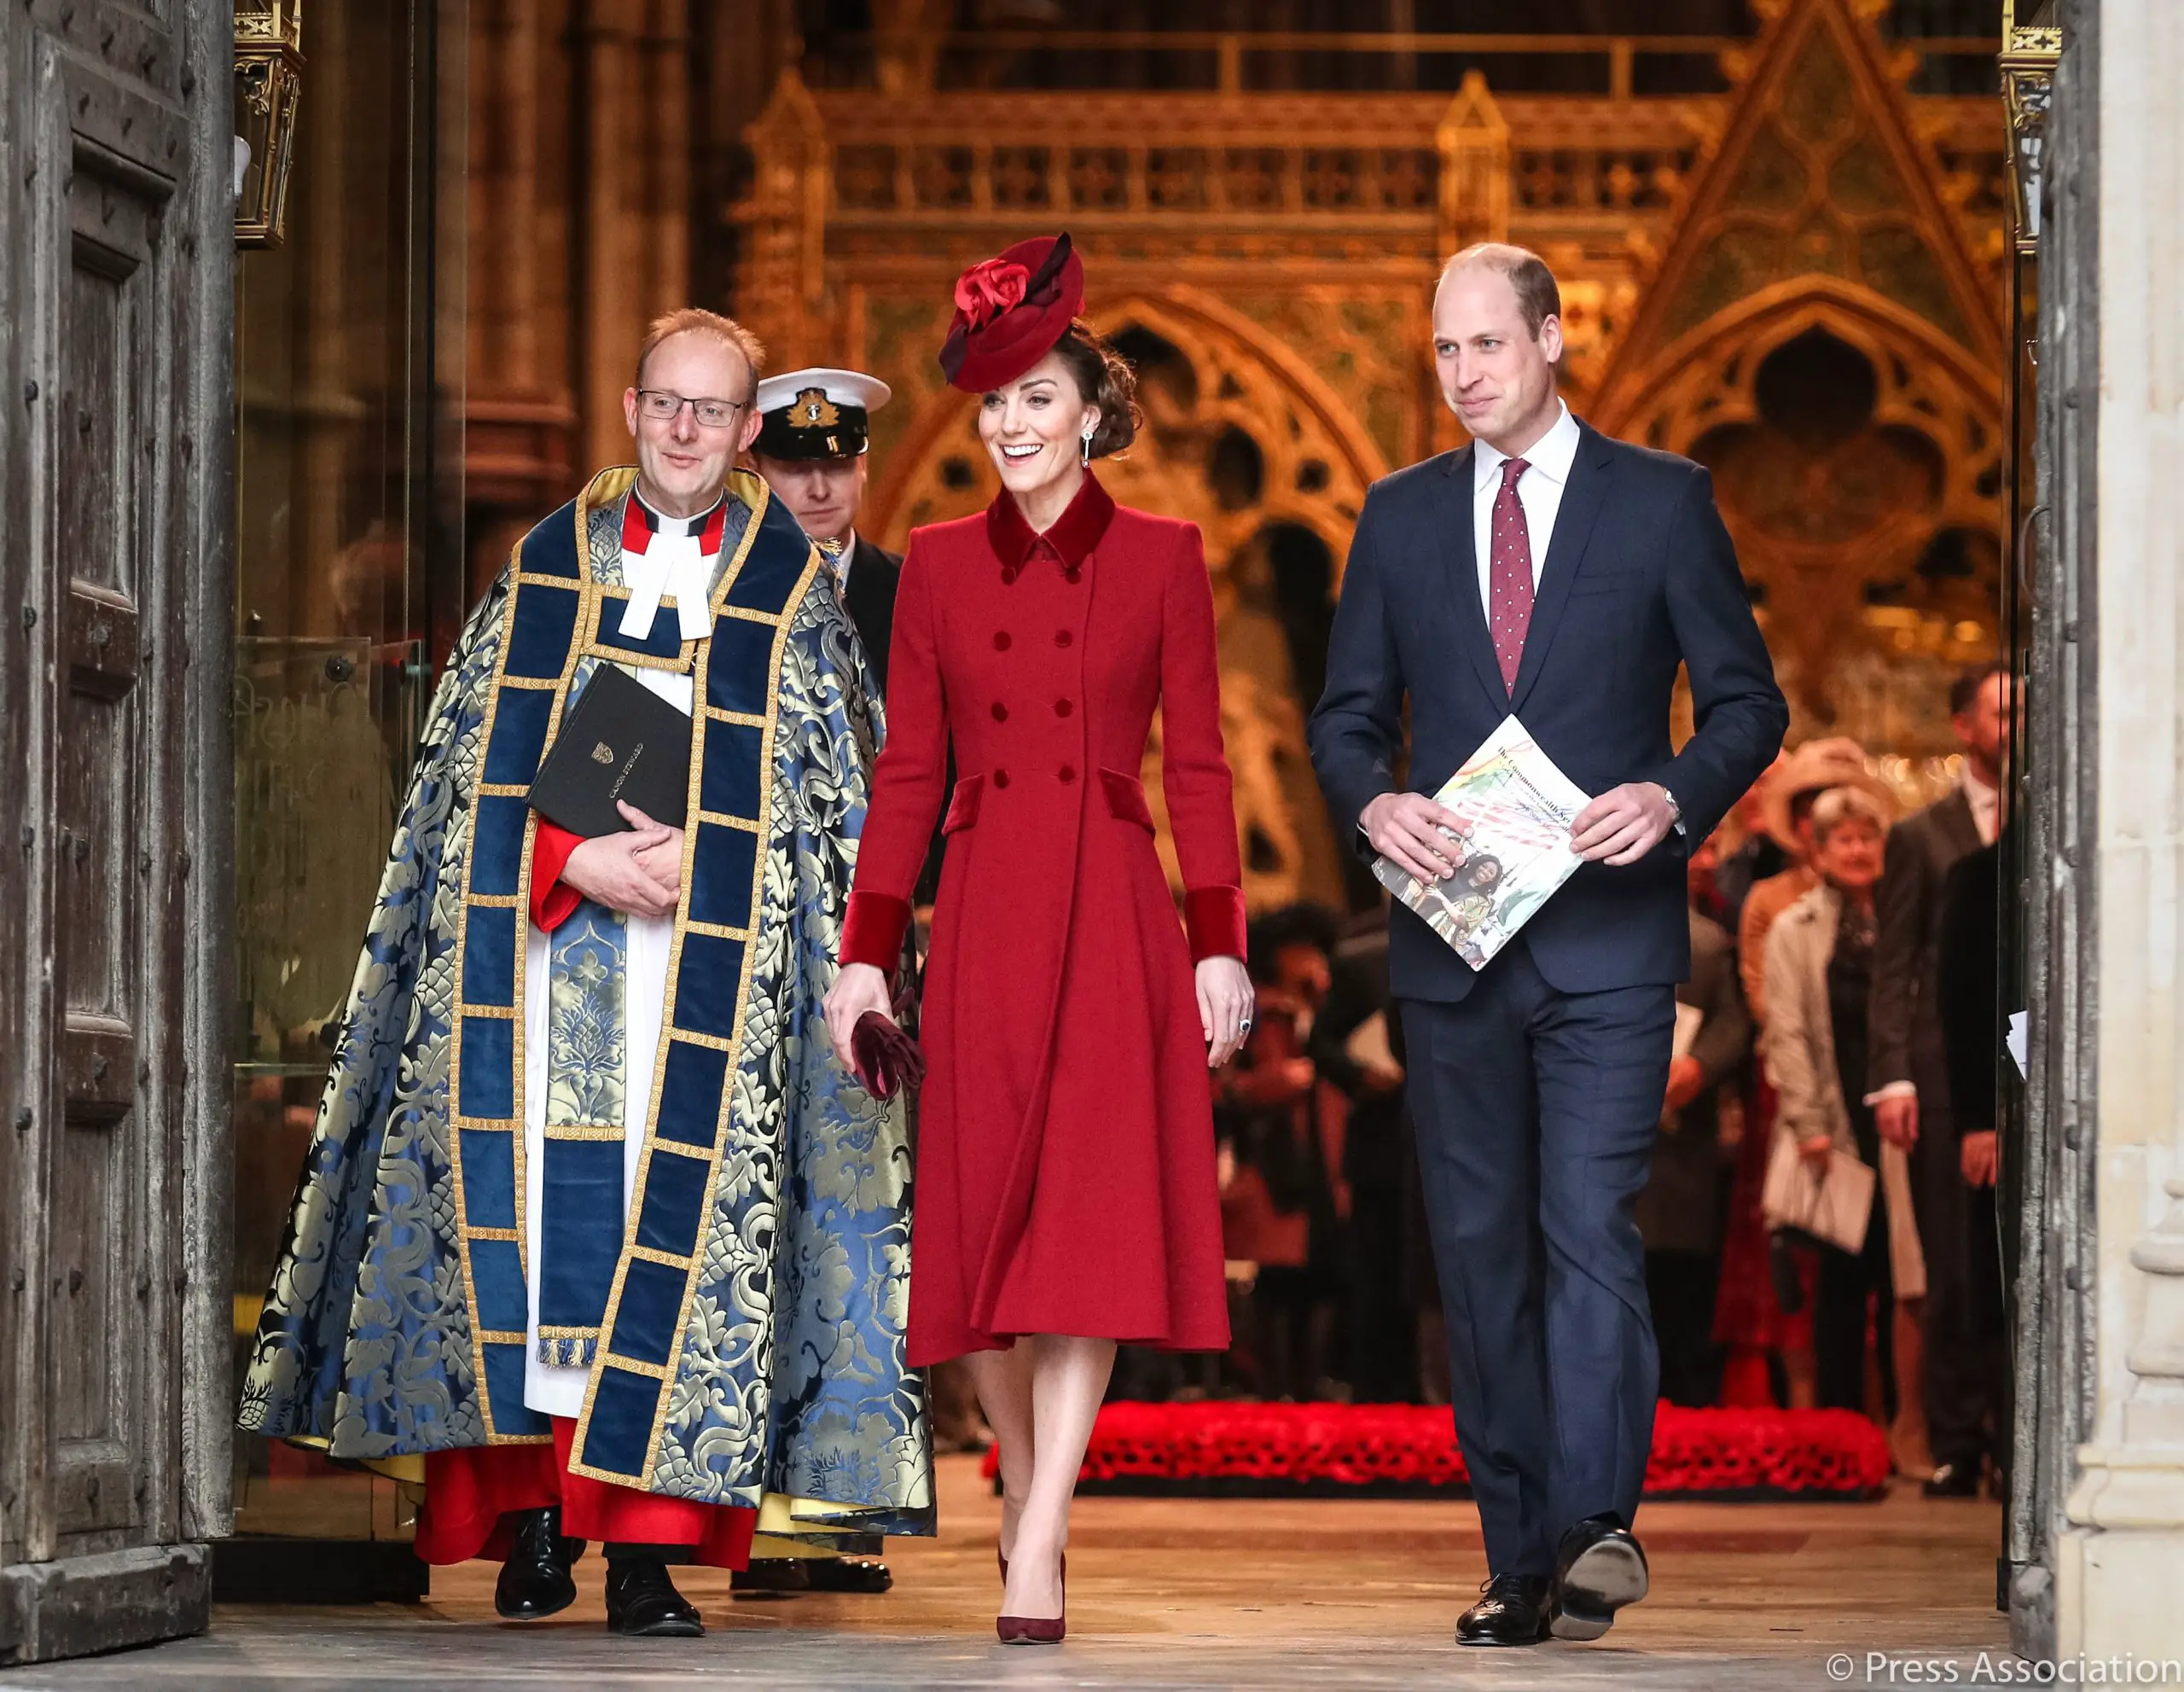 Duchess of Cambridge wore Red catherine walker coat at the commonwealth day service